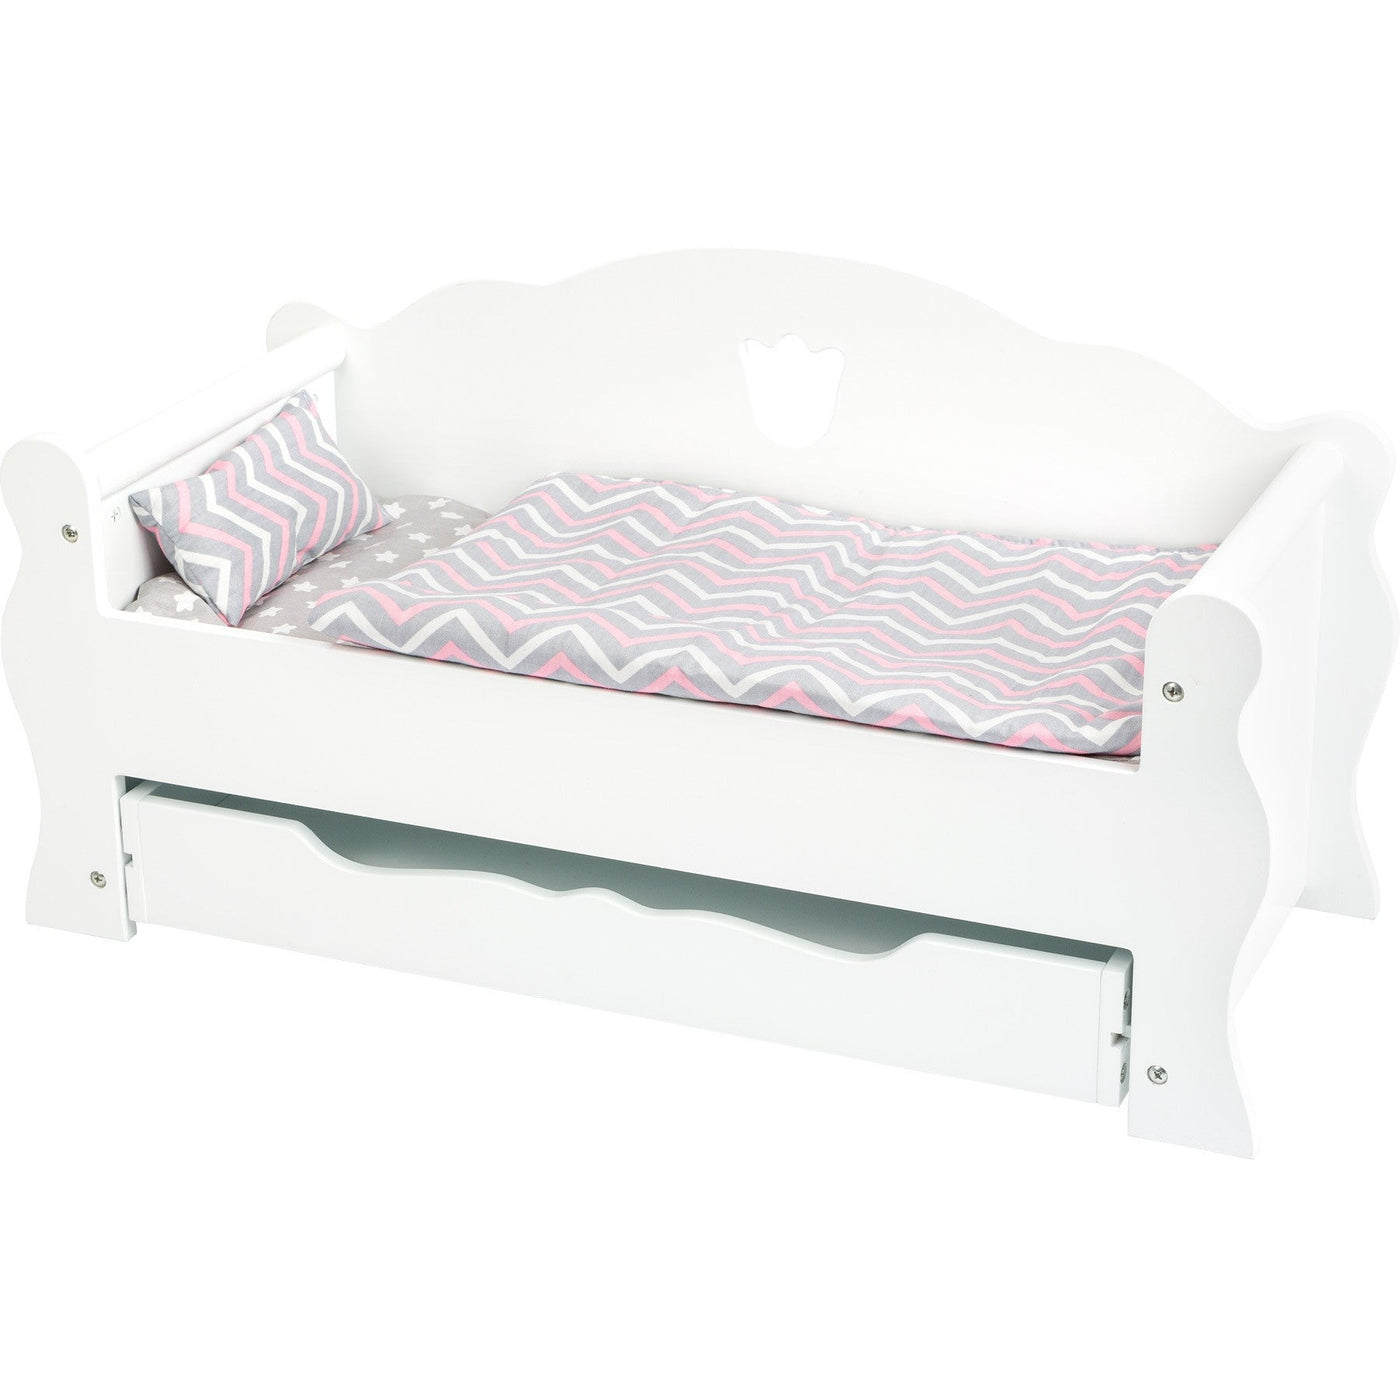 Doll's Day Bed